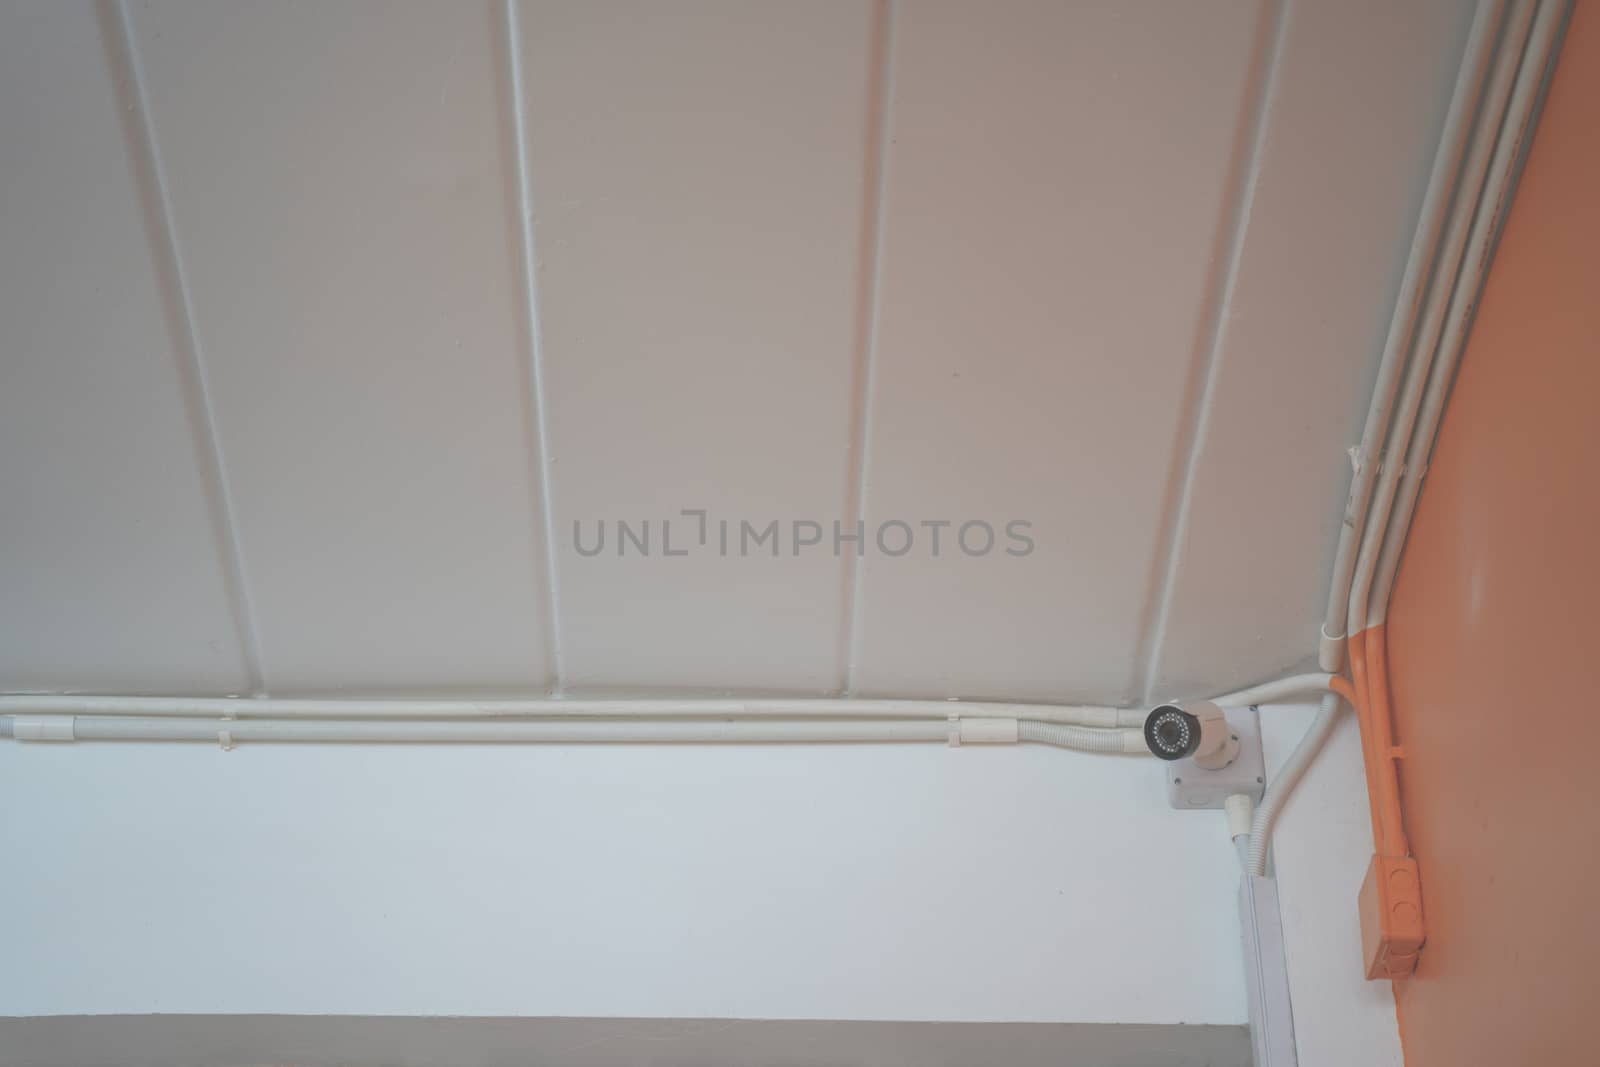 A CCTV security camera installed on ceiling building